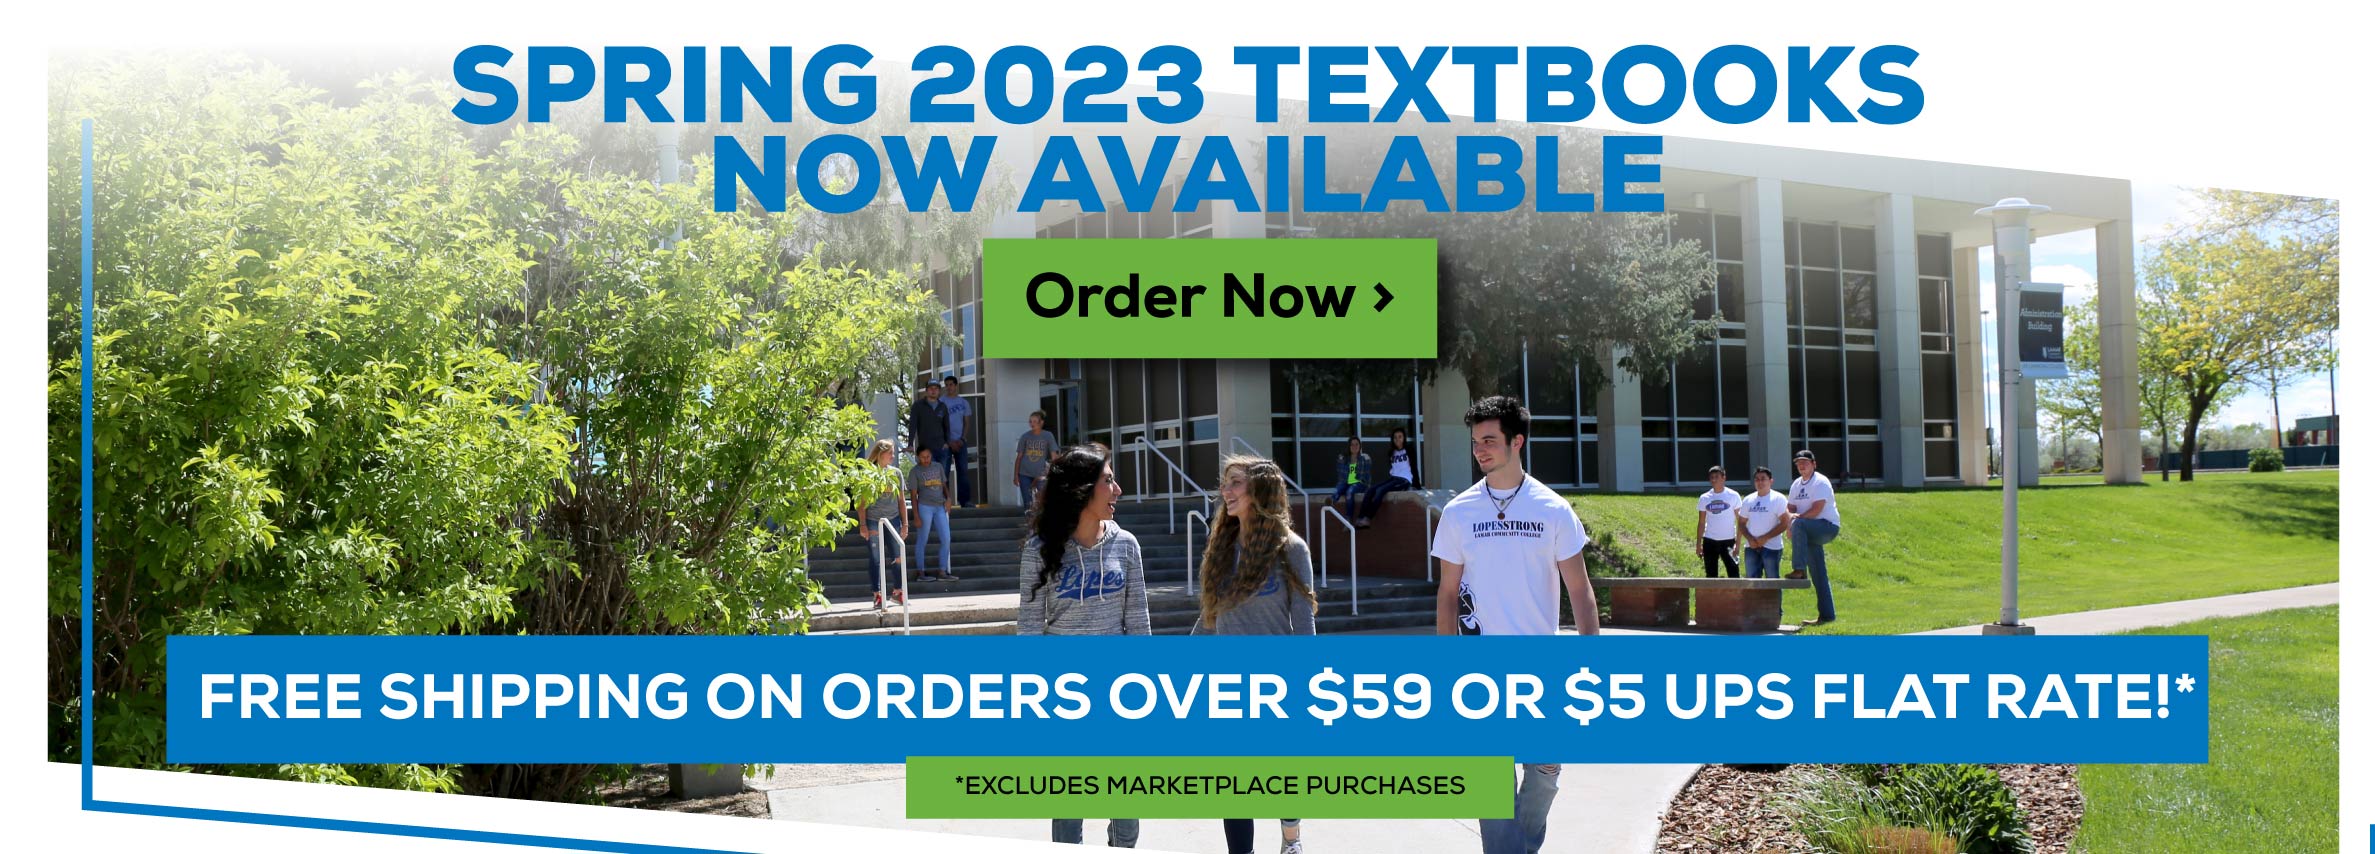 Spring 2023 Textbooks Now Available Order Now - Free Shipping on Orders over $59 or $5 UPS Flat Rate* Excludes Marketplace Purchases